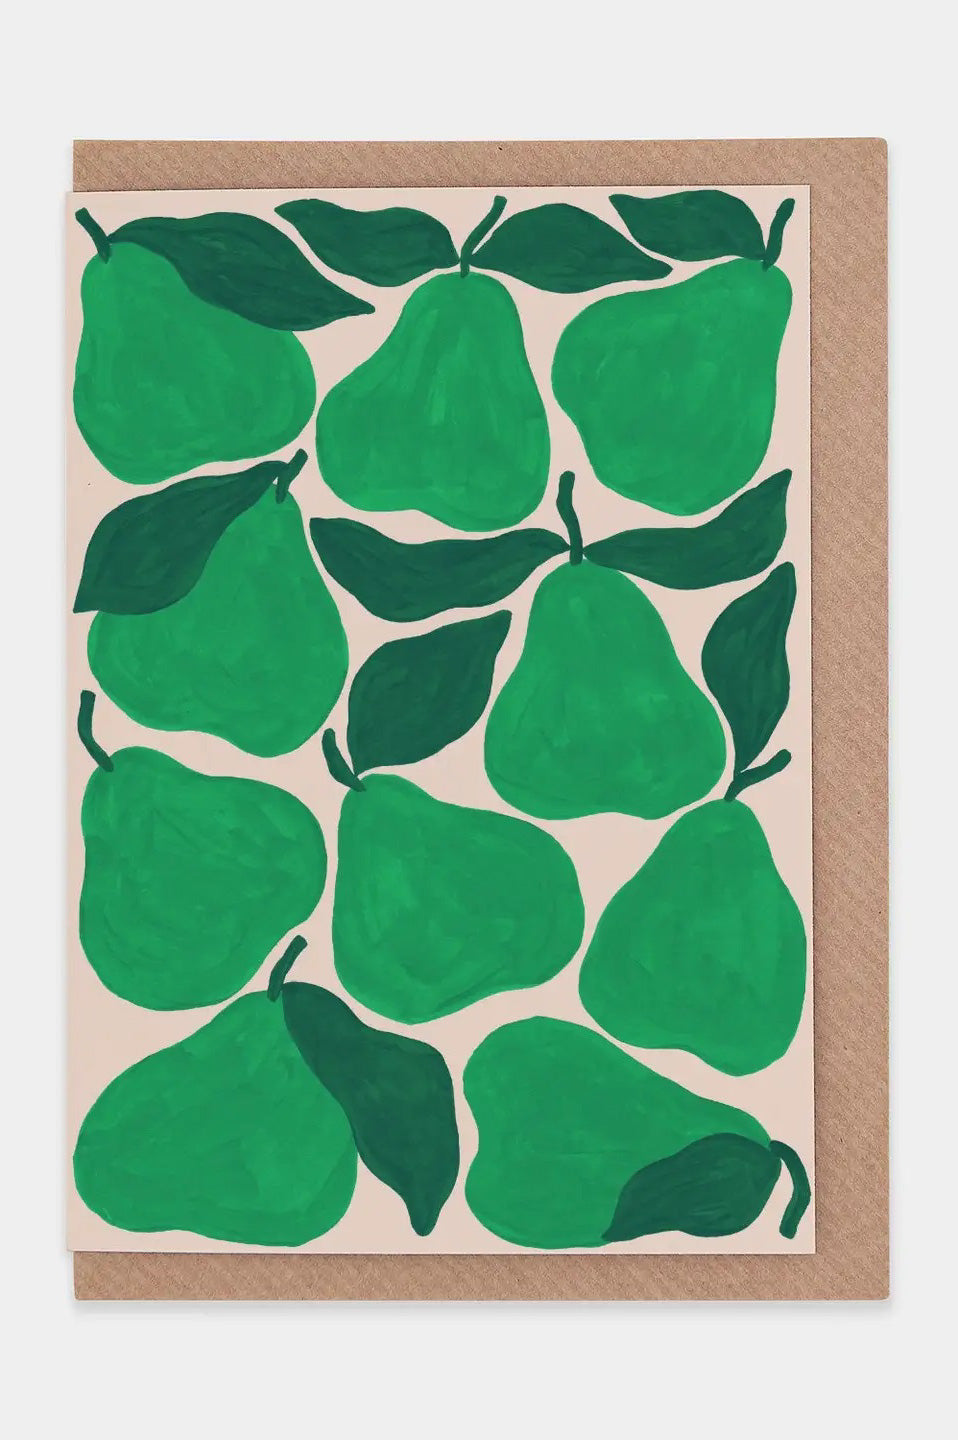 Evermade Green Pears Greetings Card - The Mercantile London